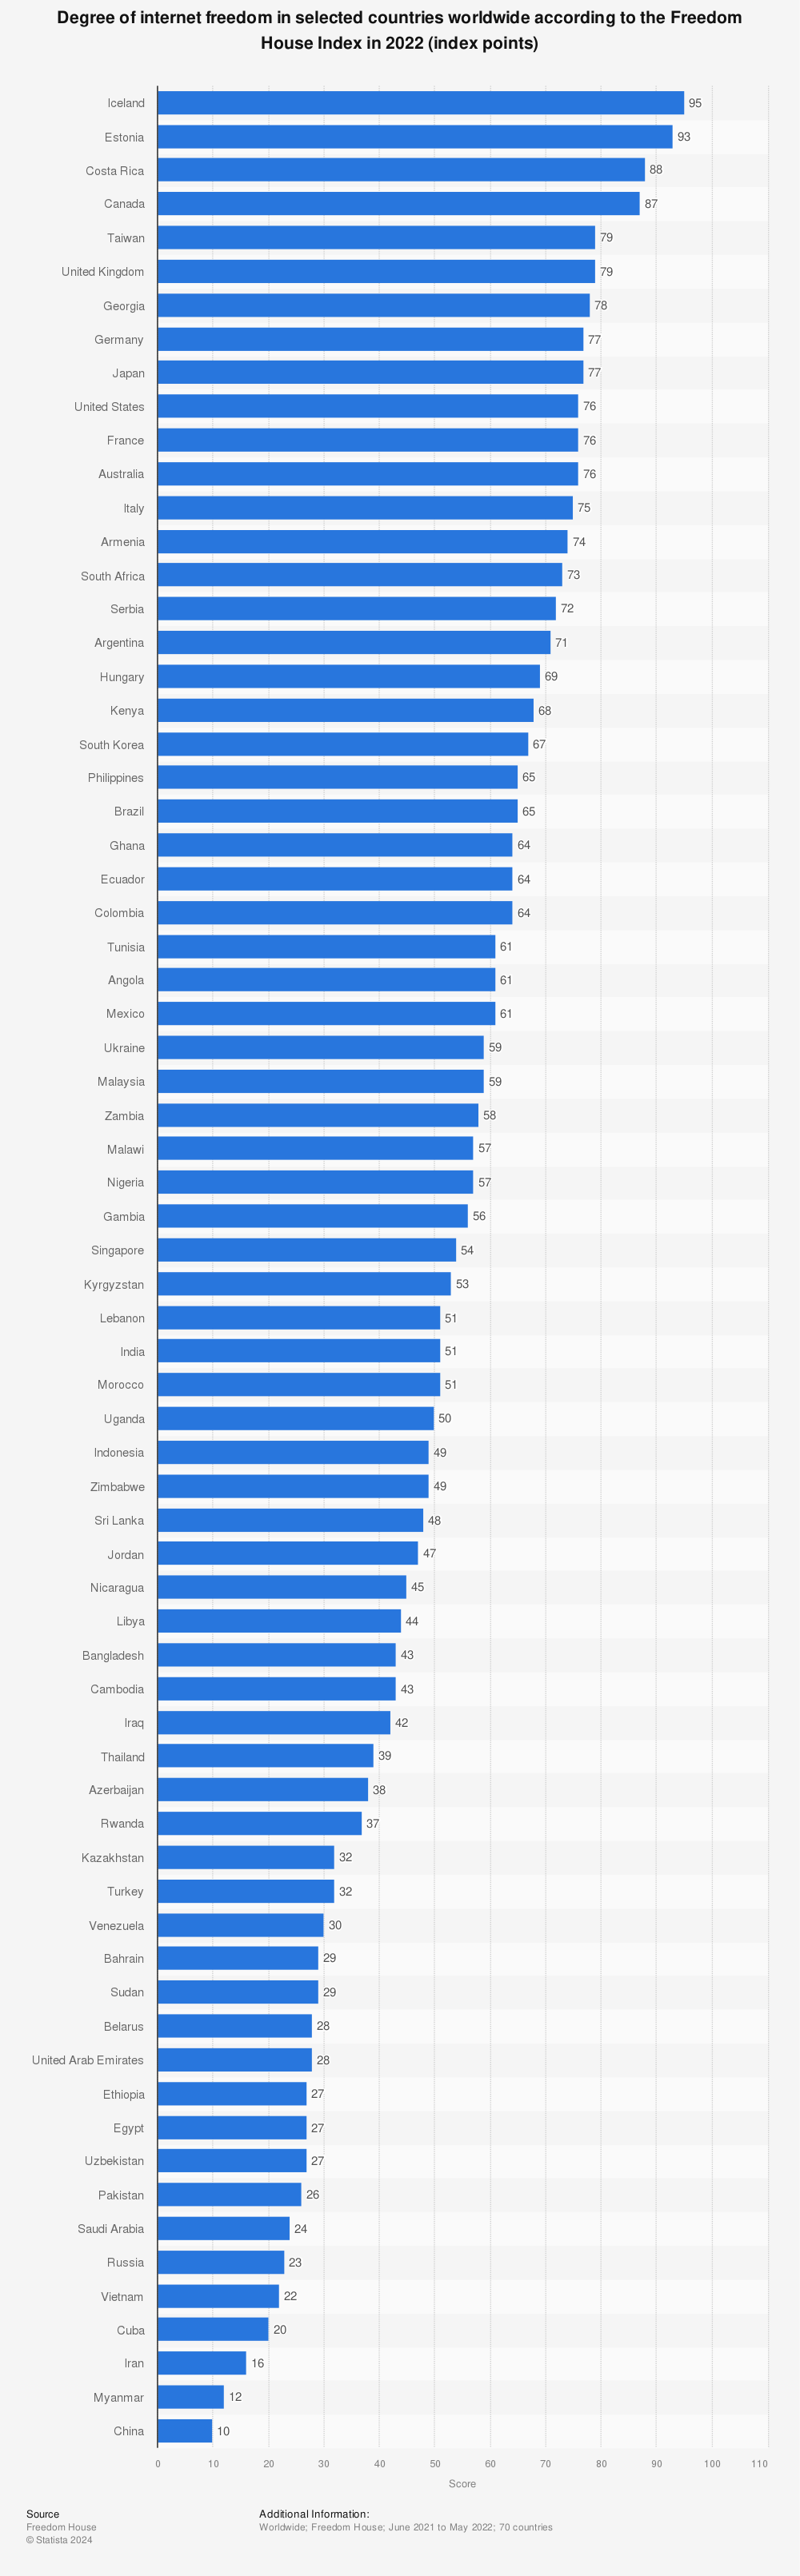 Statistic: Degree of internet freedom in selected countries according to the Freedom House Index 2017 (index points) | Statista